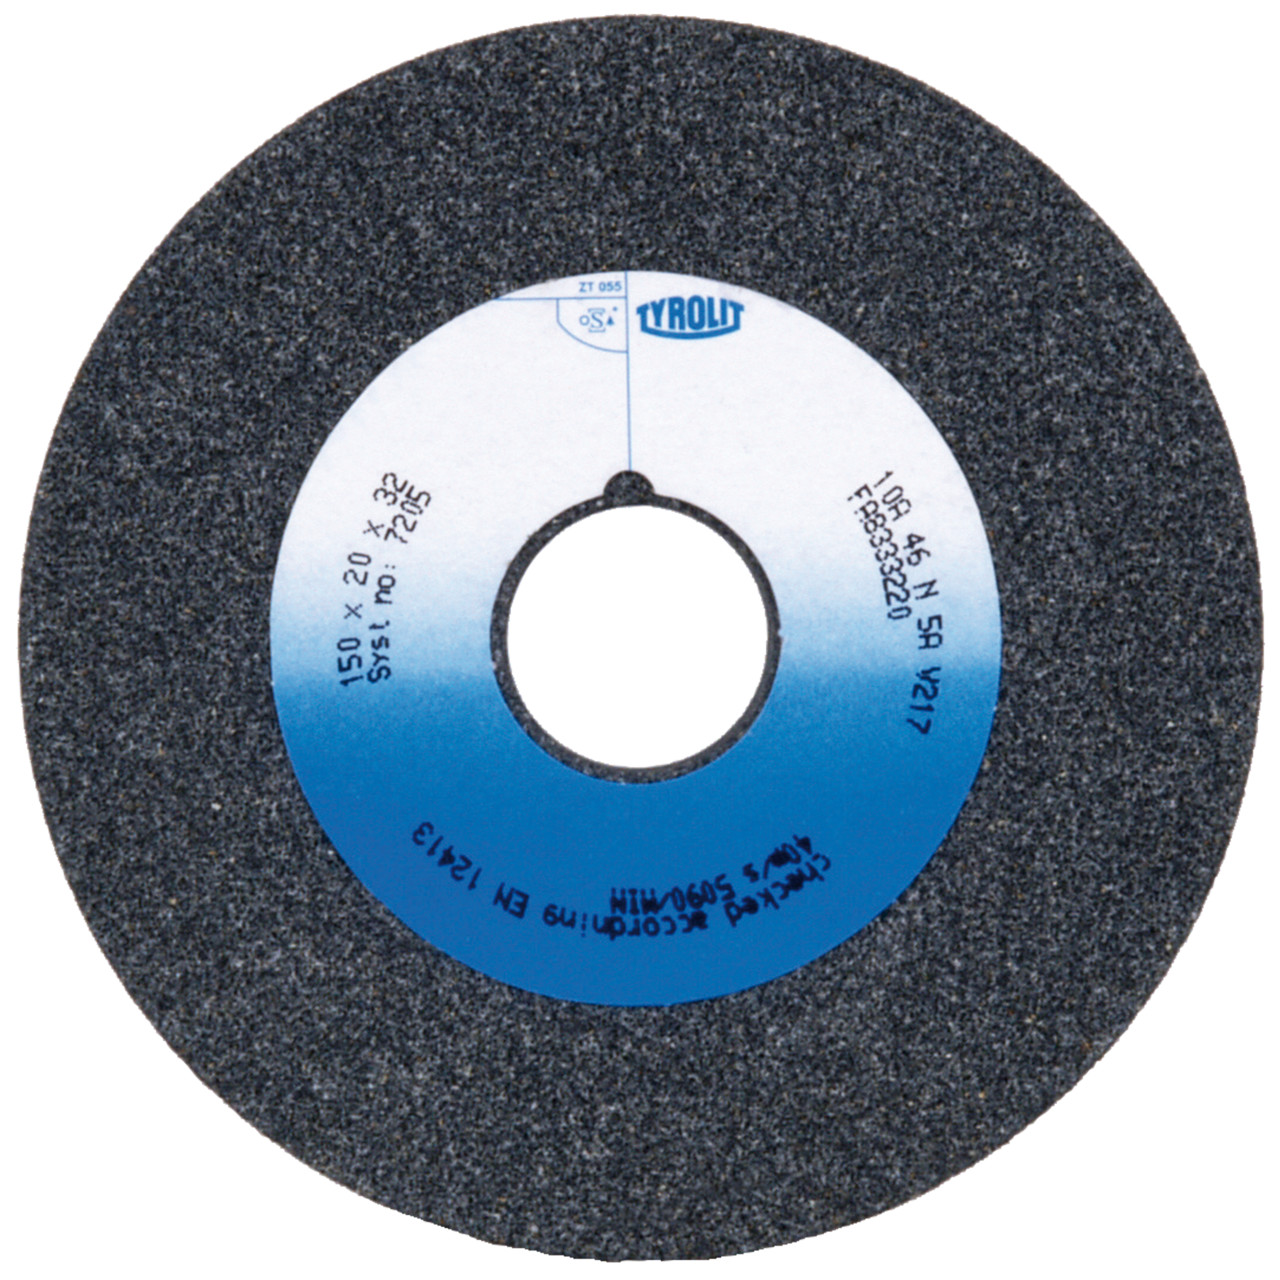 Tyrolit Conventional ceramic grinding discs DxDxH 150x25x32 For unalloyed and low-alloy steels, shape: 1, Art. 2758